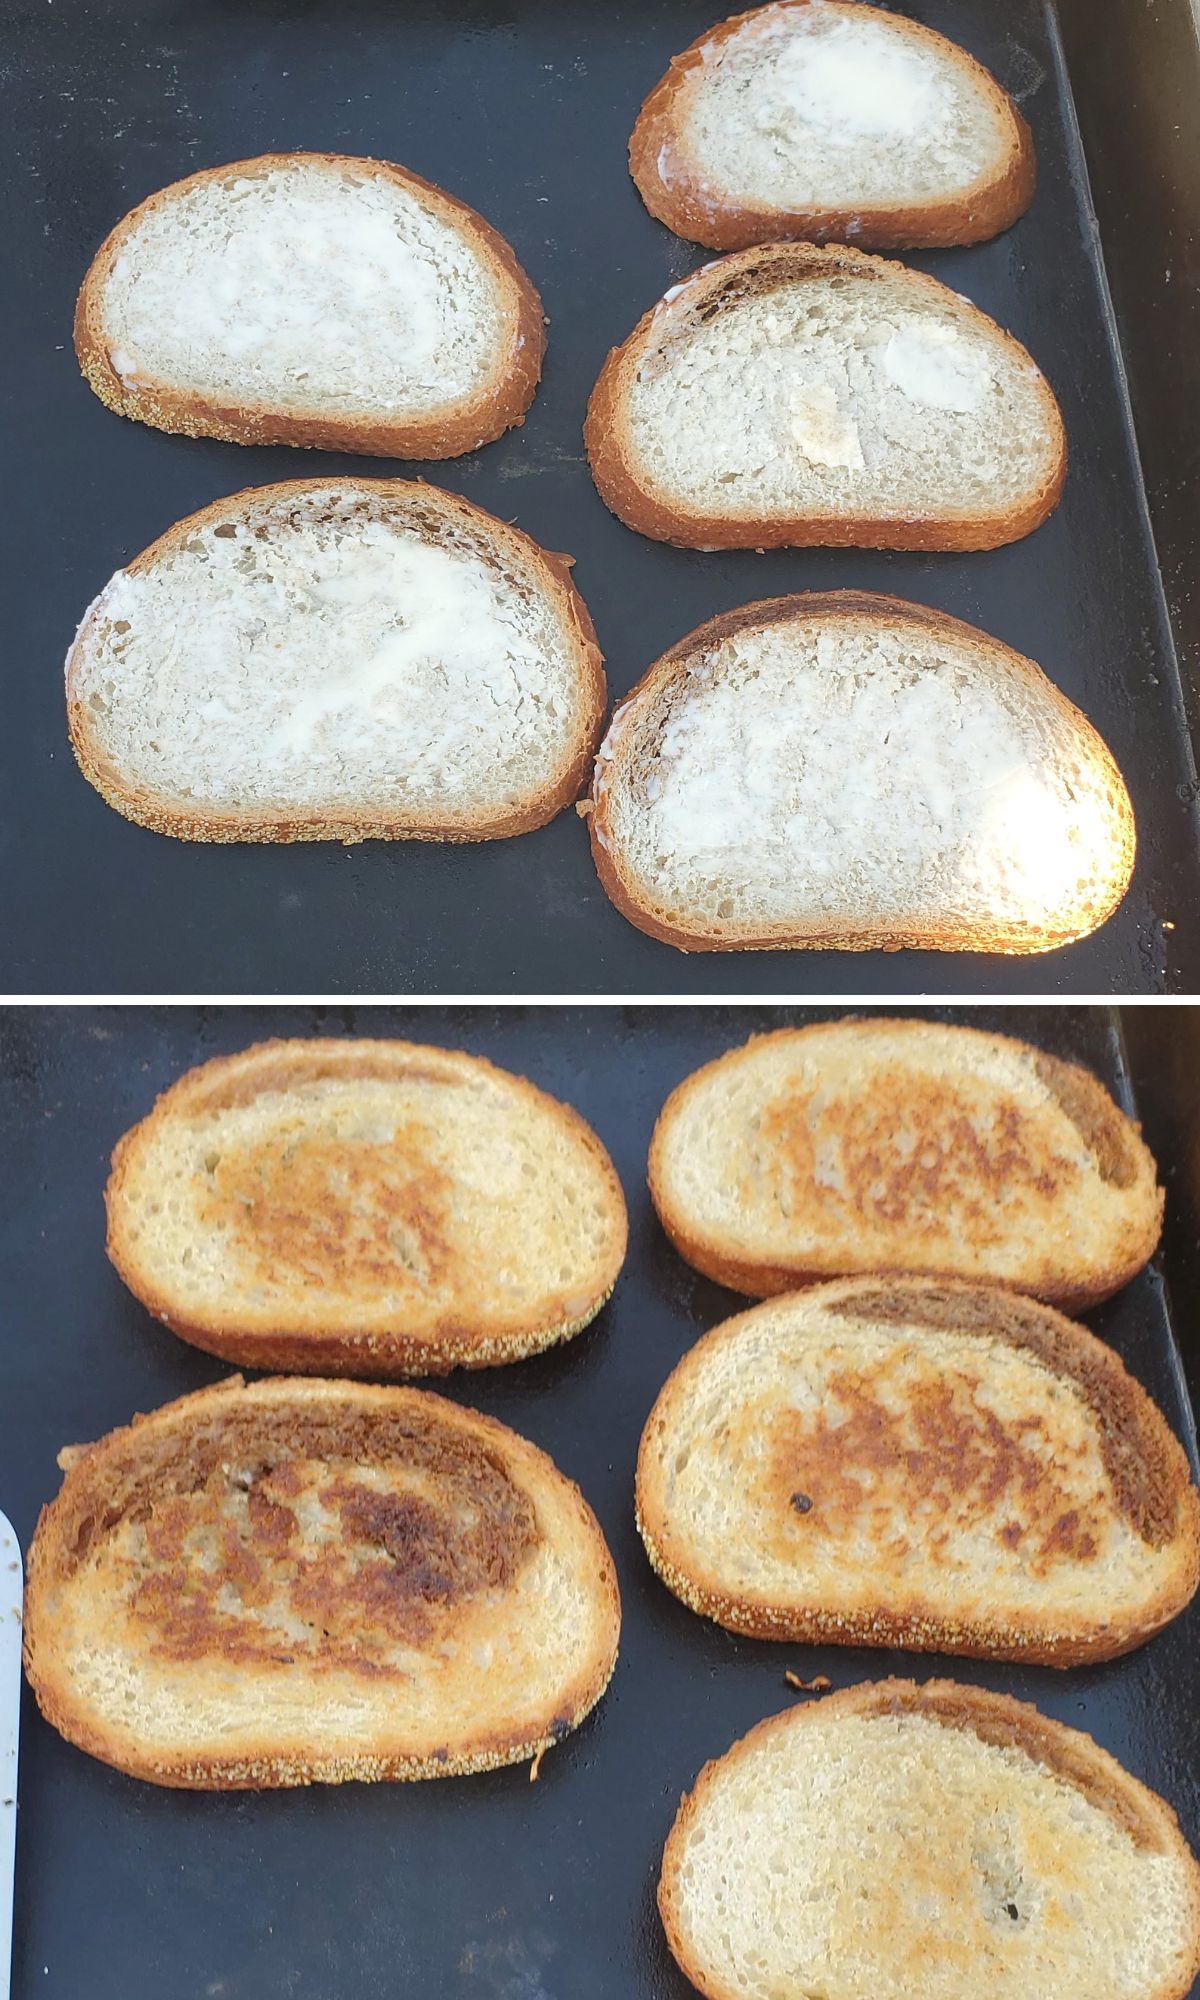 Four pictures of toasted bread on a baking sheet.